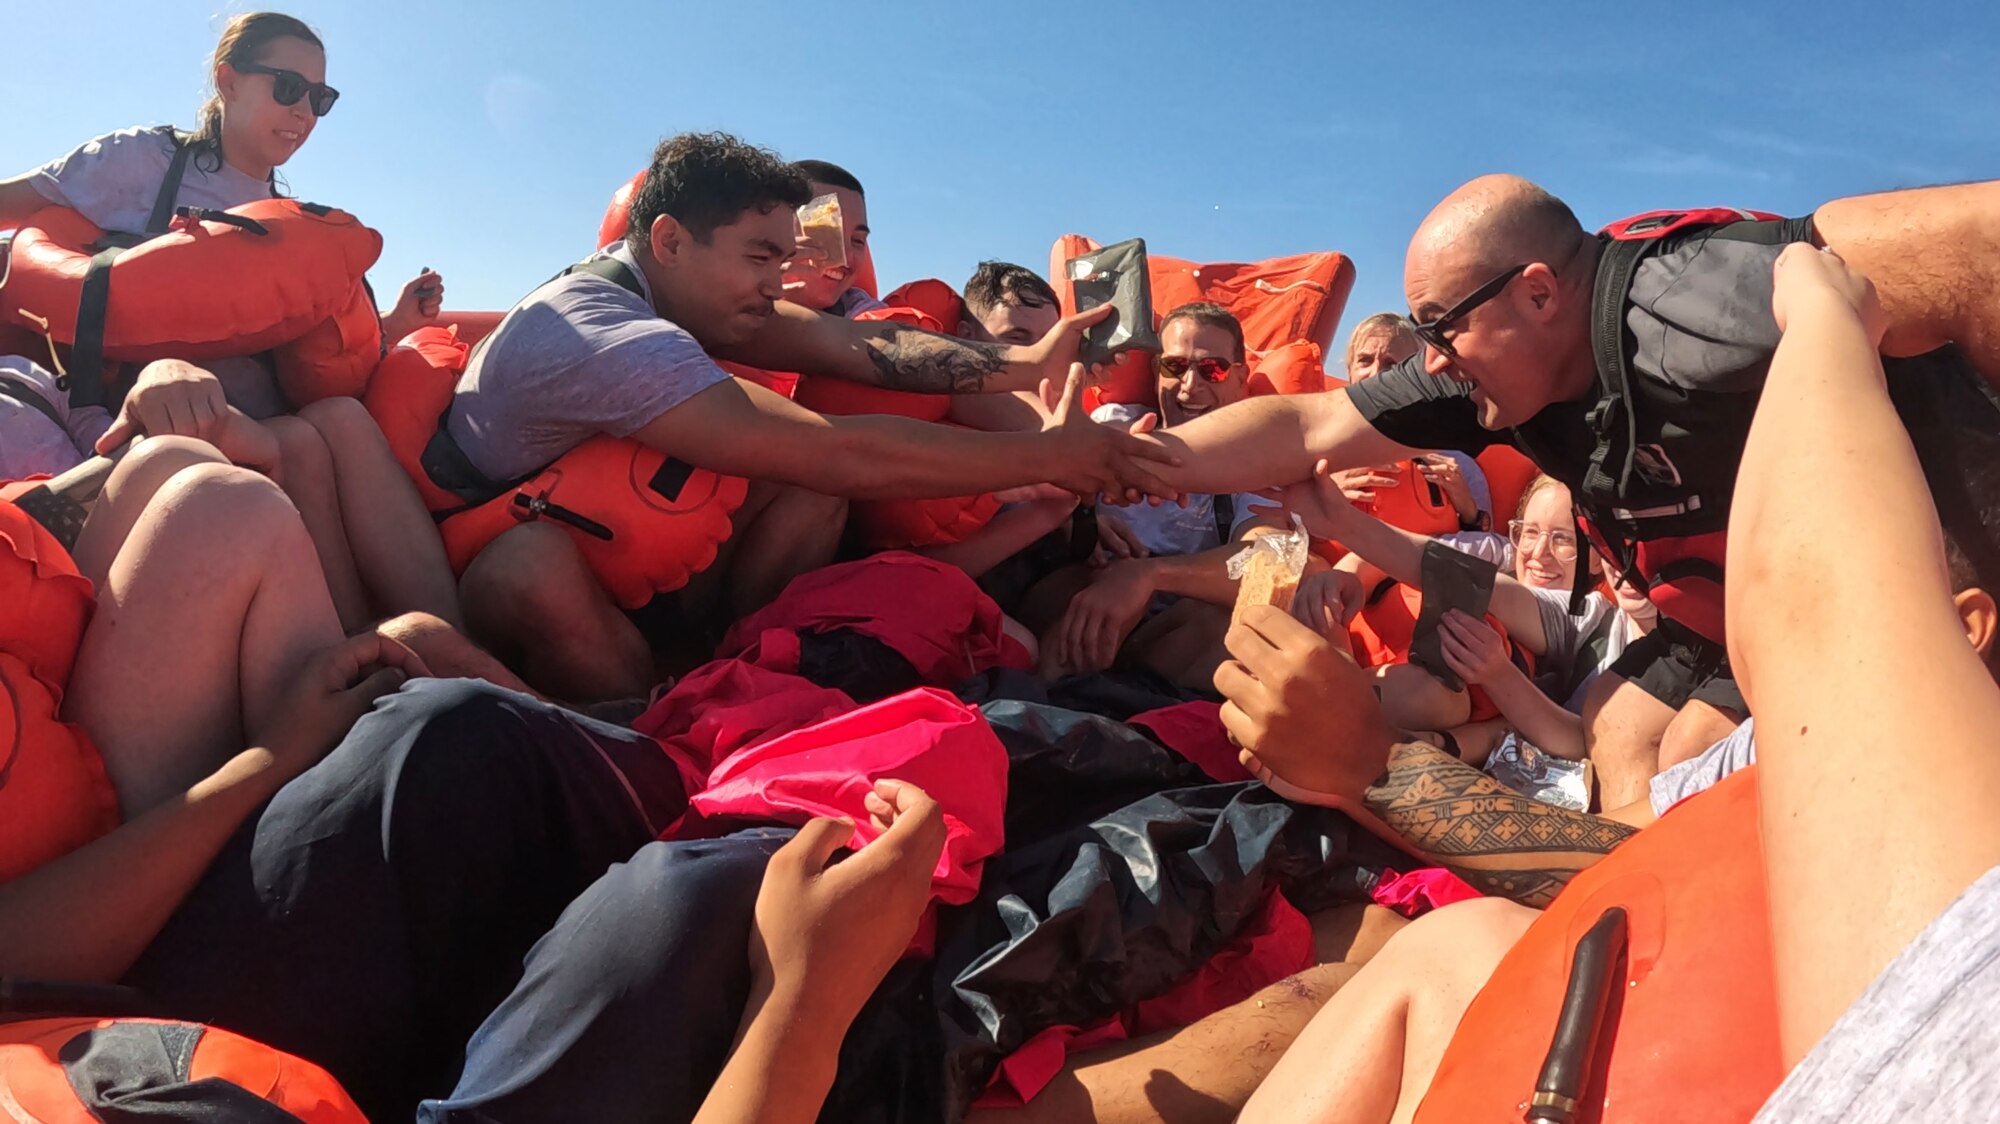 A man reaches out to grasp another man's arm in a life raft in the ocean surrounded by other people.